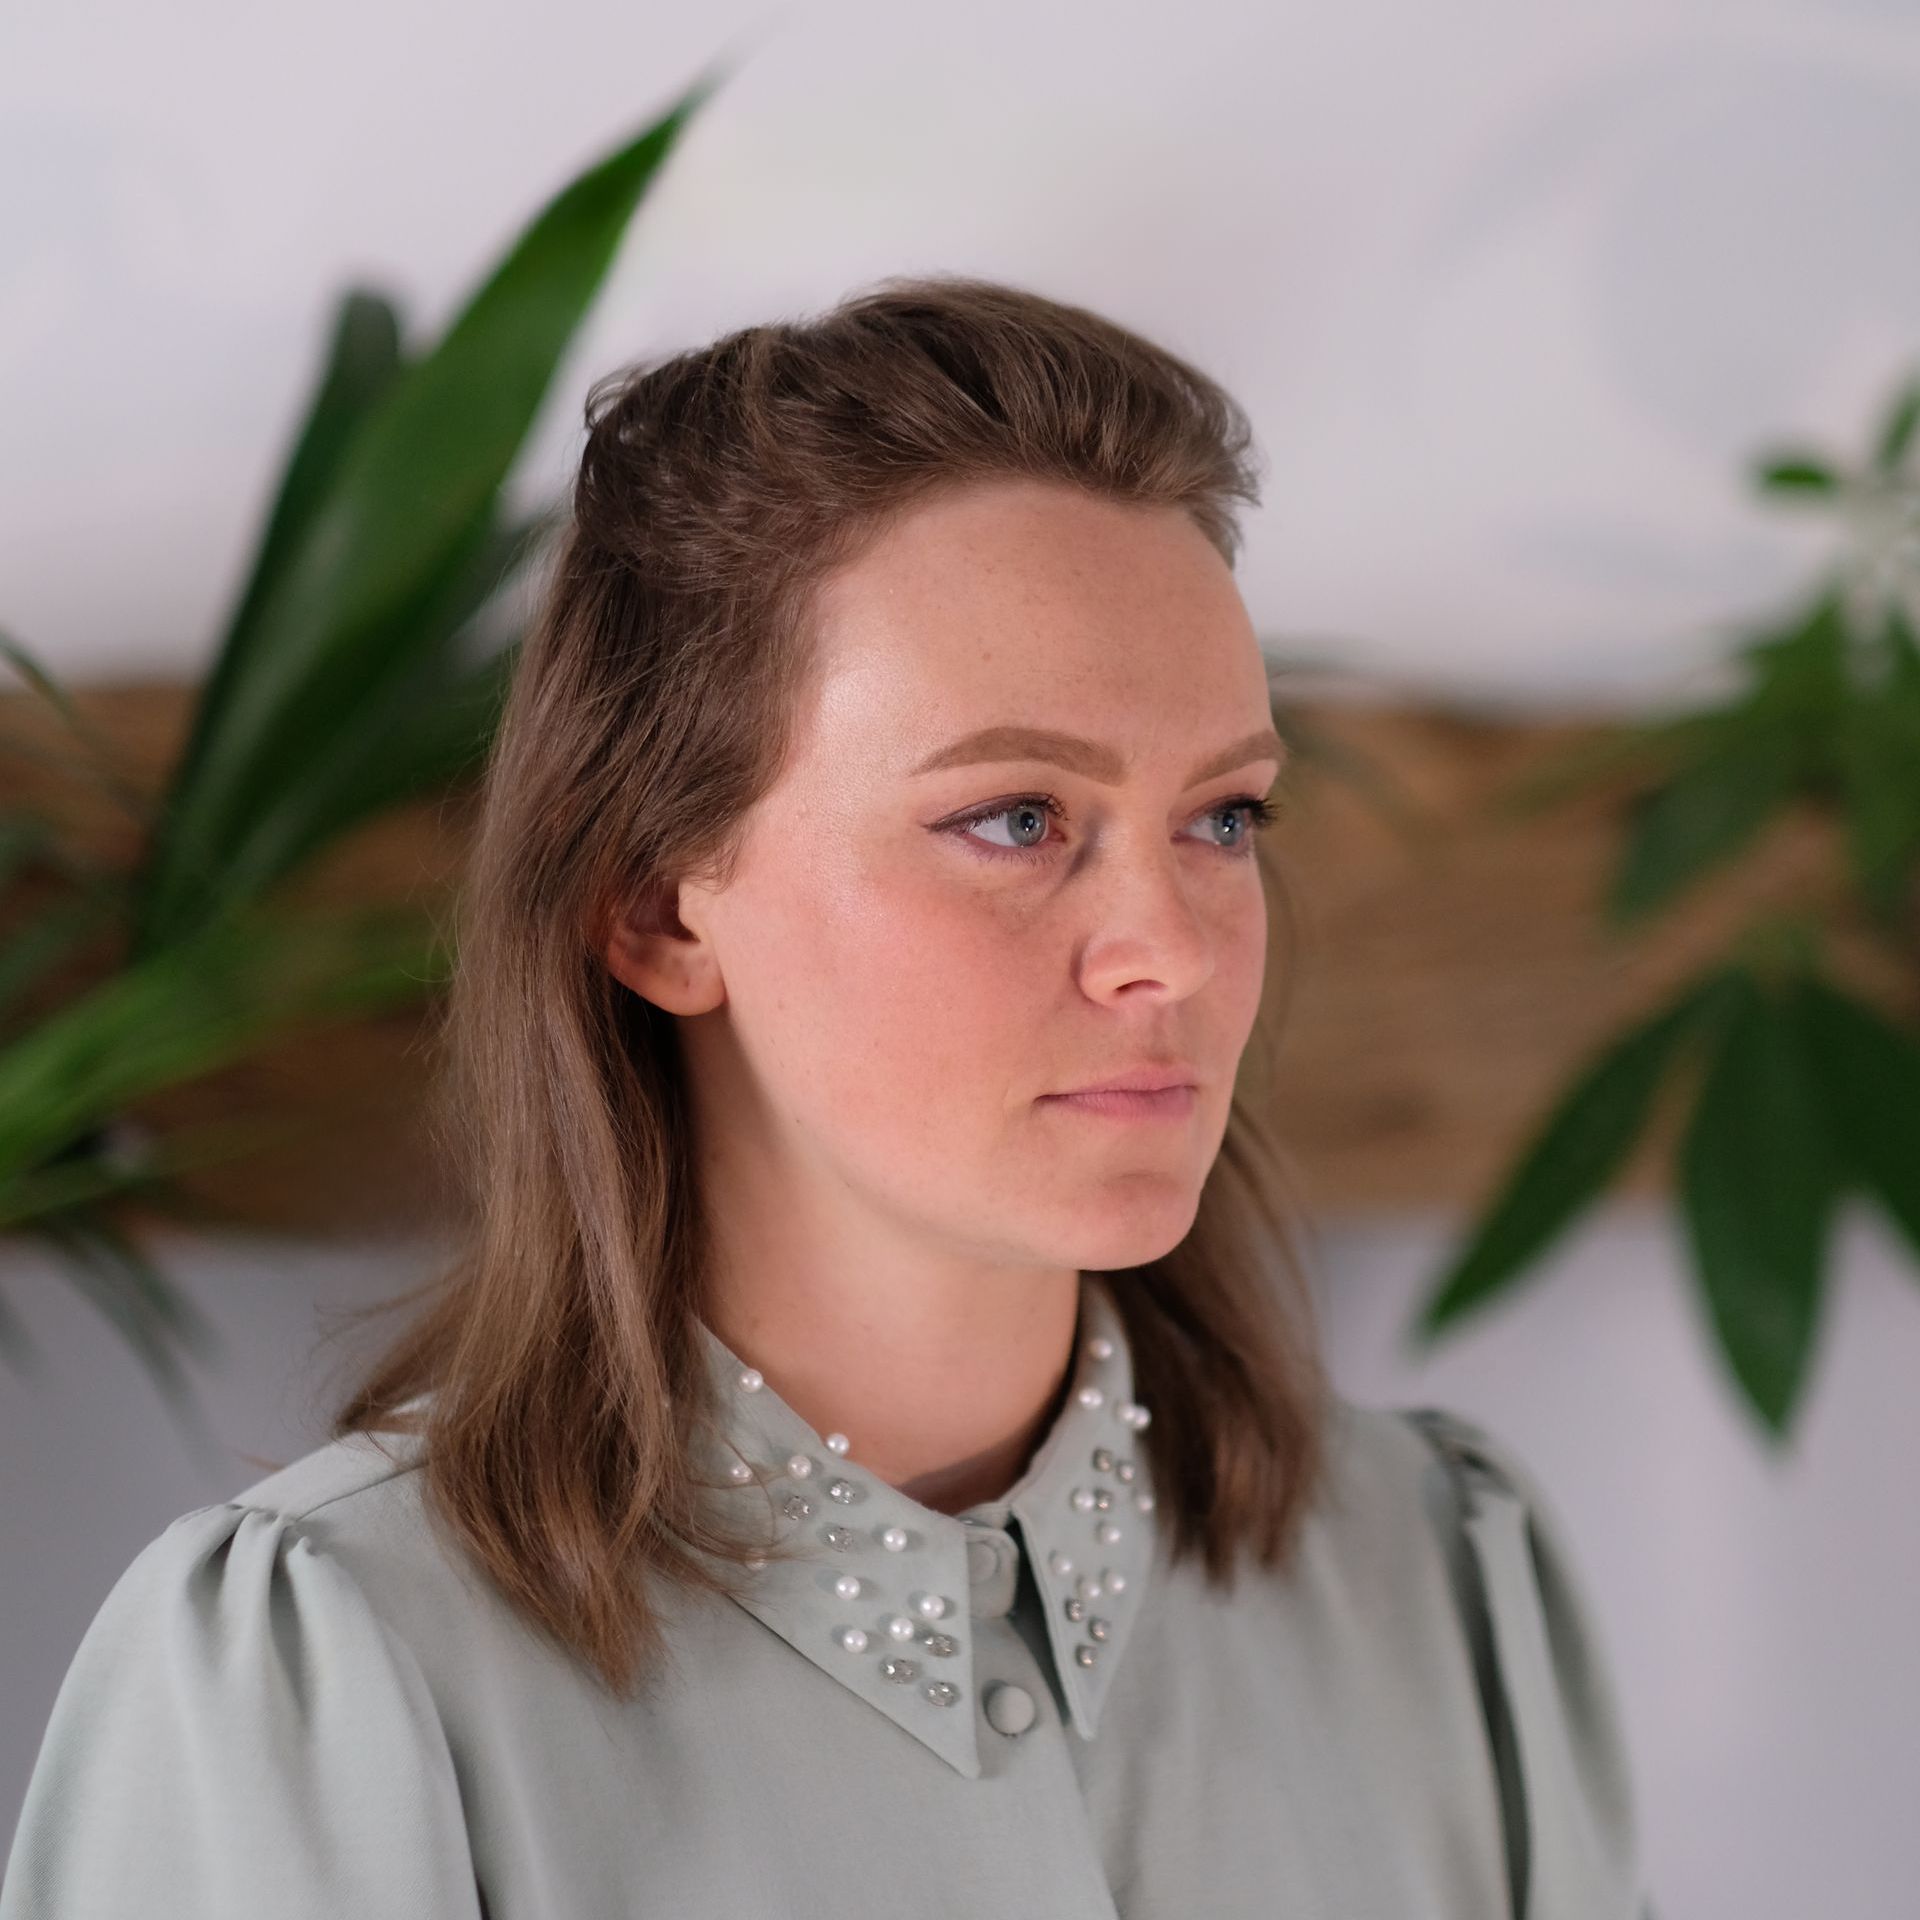 Headshot: a white woman with light brown hair looks into the distance wearing a blue-grey top with embellished collar